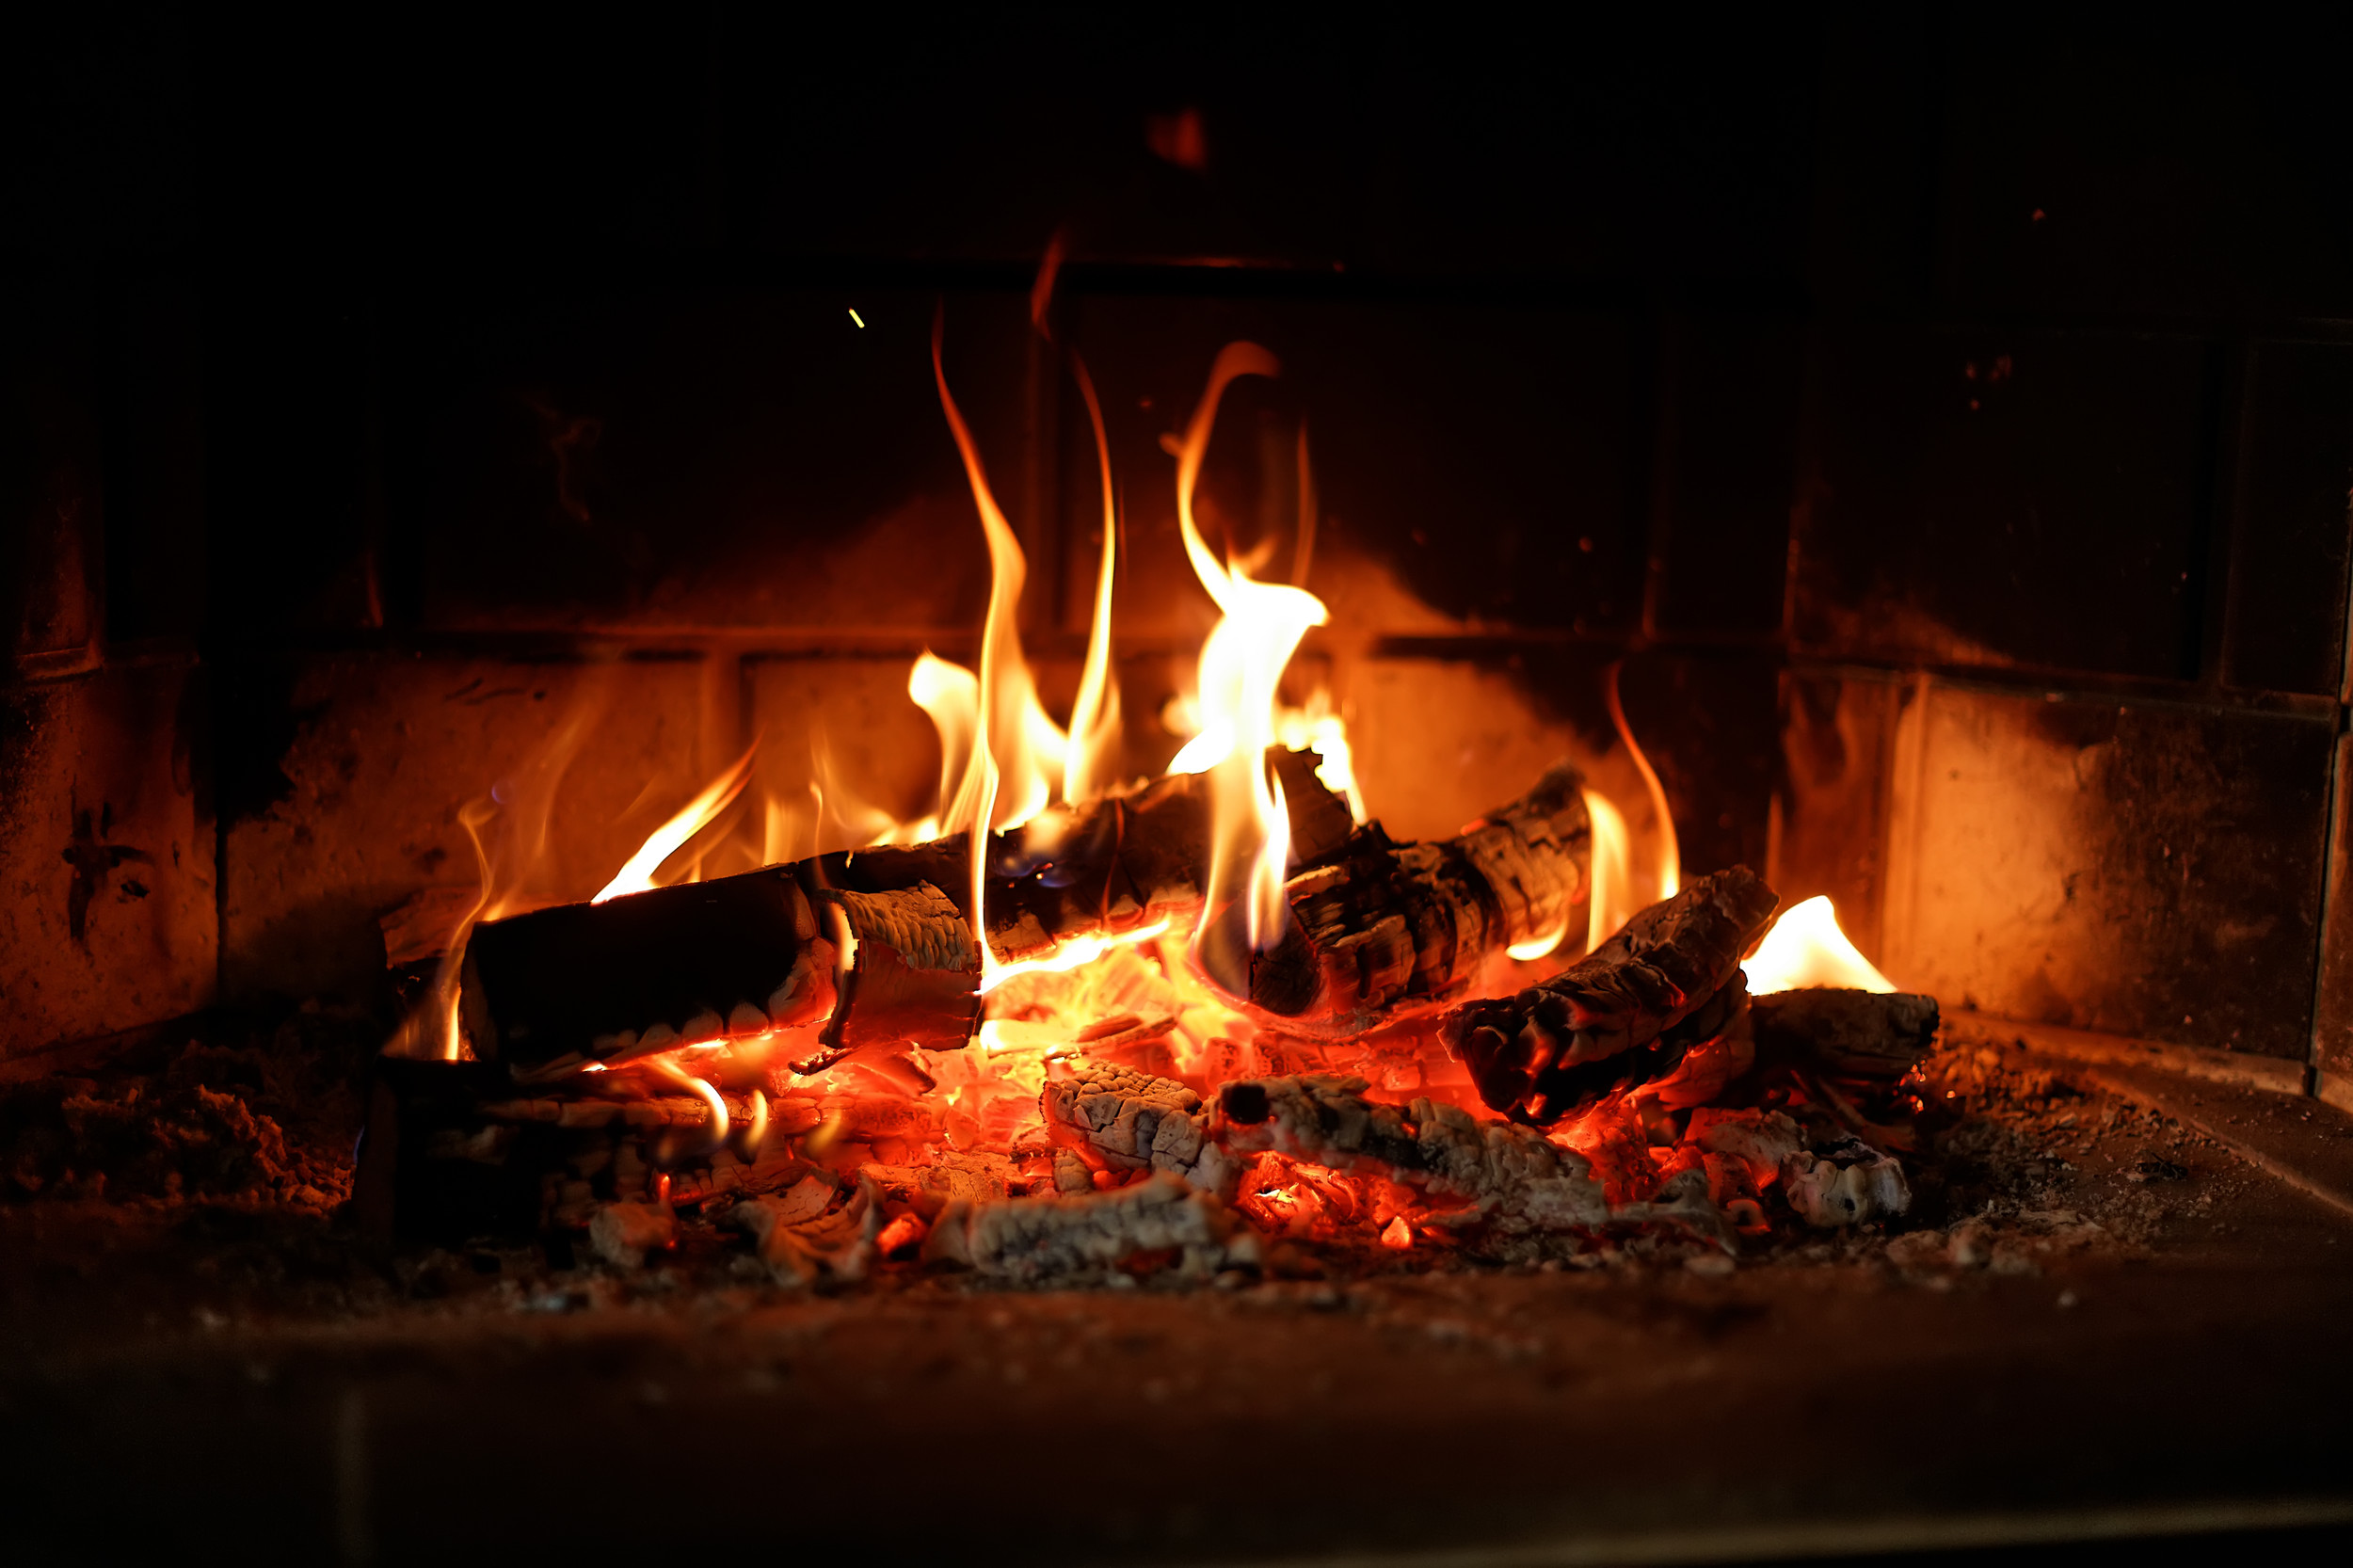 Directv Channel Fureplace - 4k Yule Log Fireplace With Crackling Fire Sounds Youtube : Sling tv ...